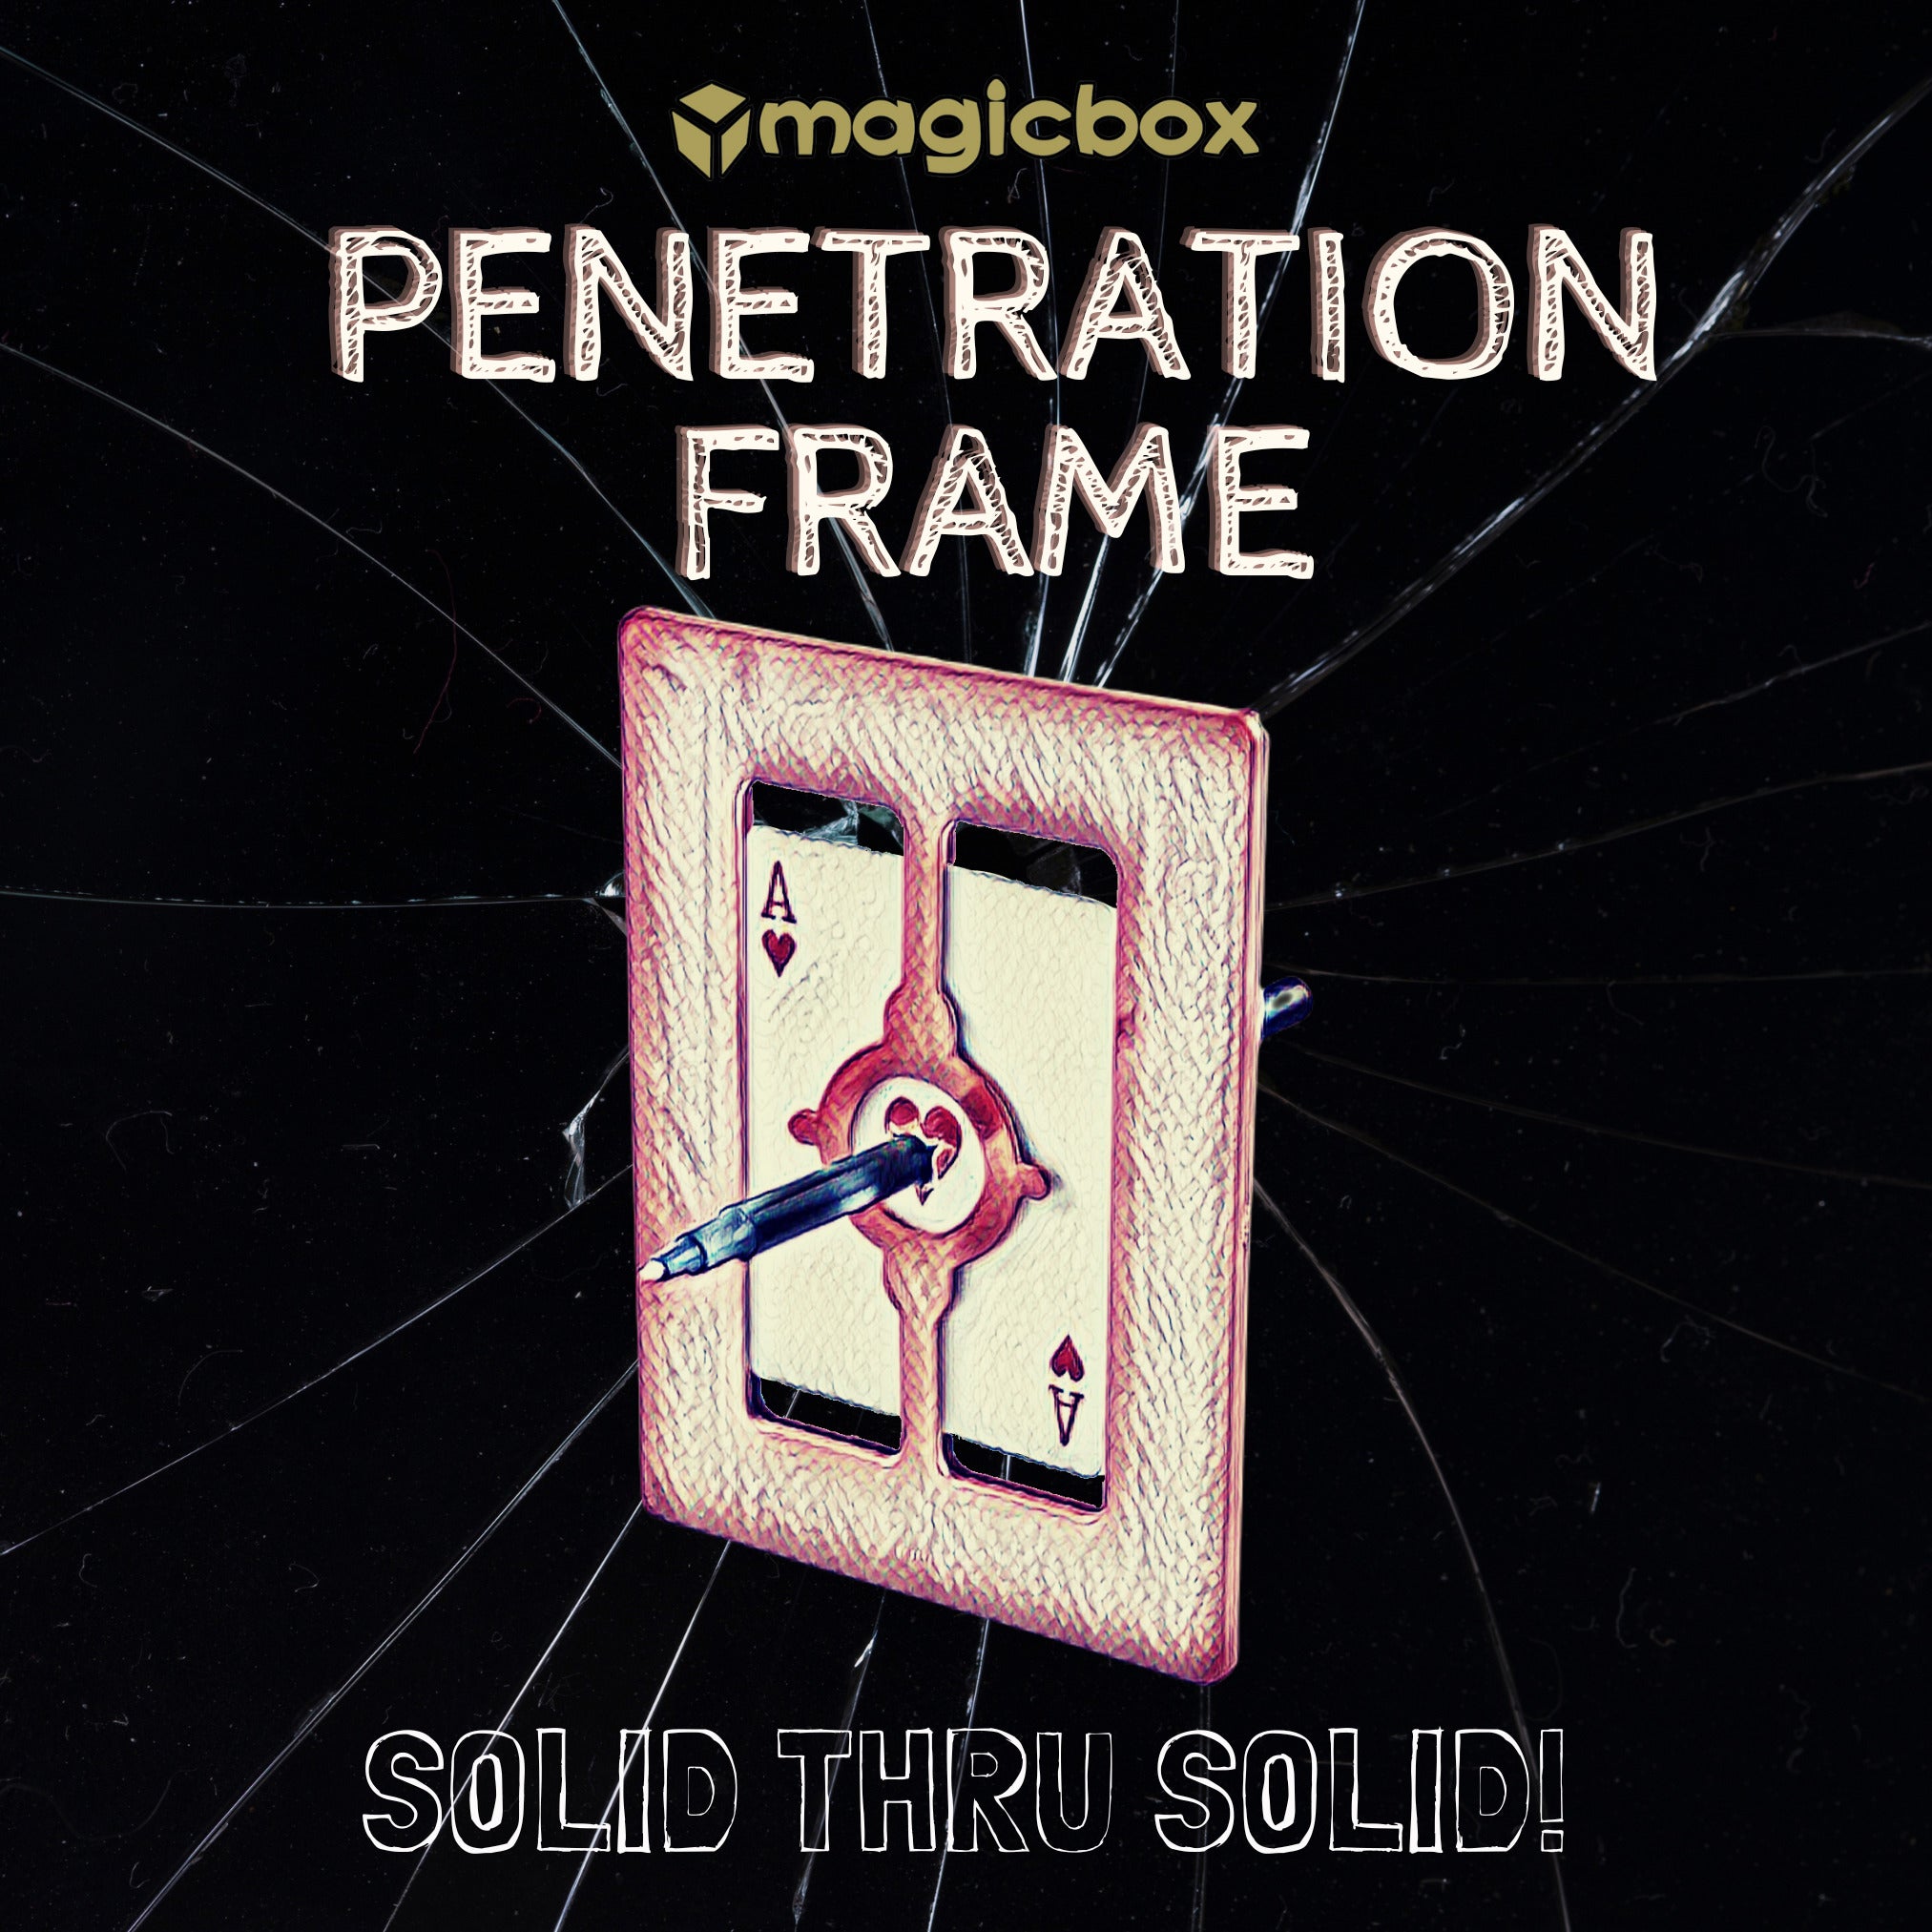 Penetration Frame by Magicbox